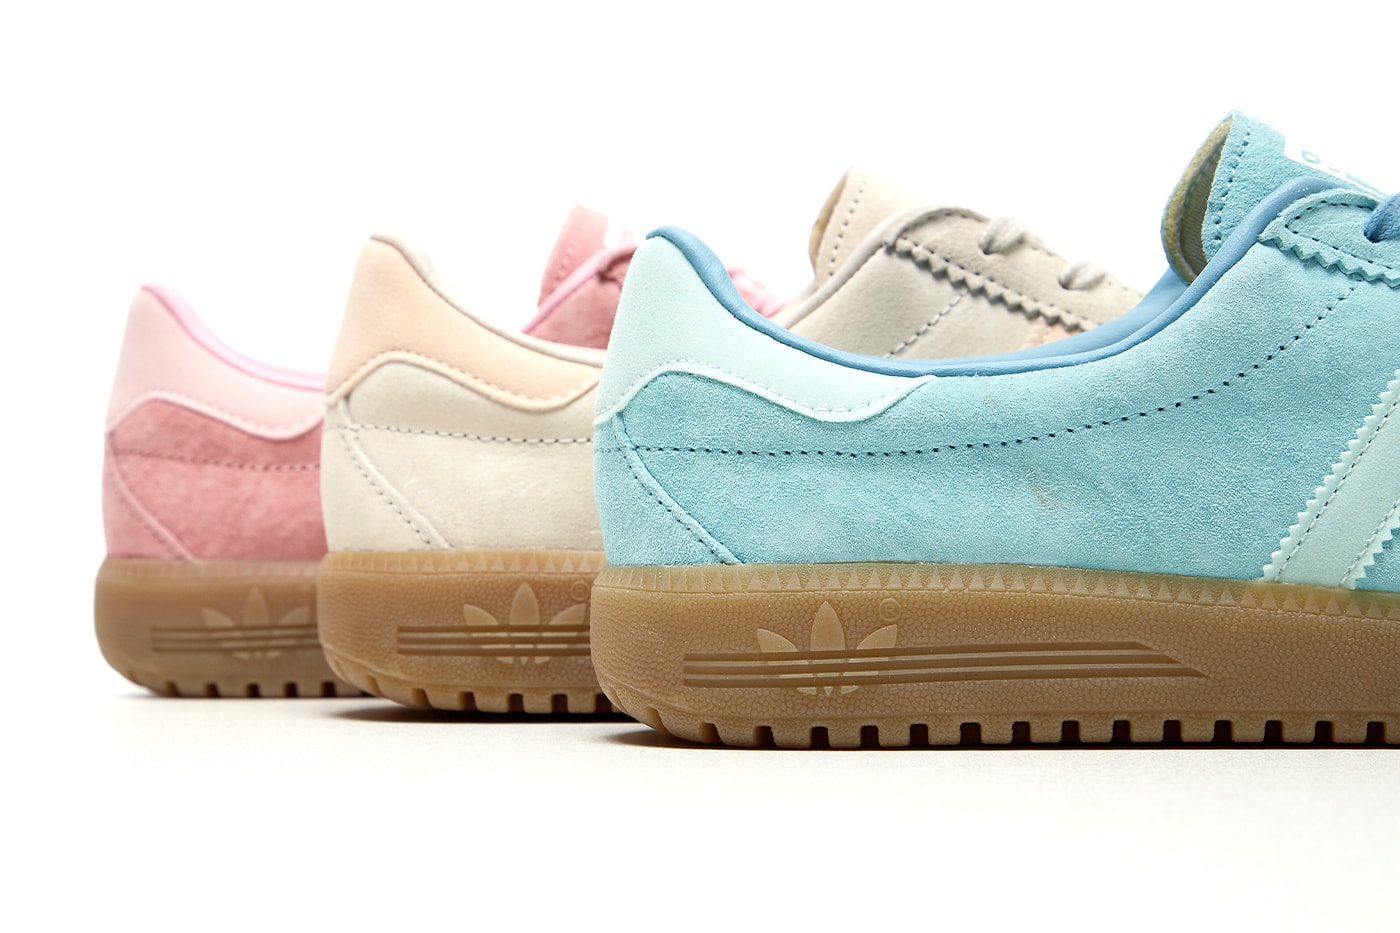 adidas Originals Bermuda Pastel Color Release Info GY7386 GY7387 GY7388 Date Buy Price 